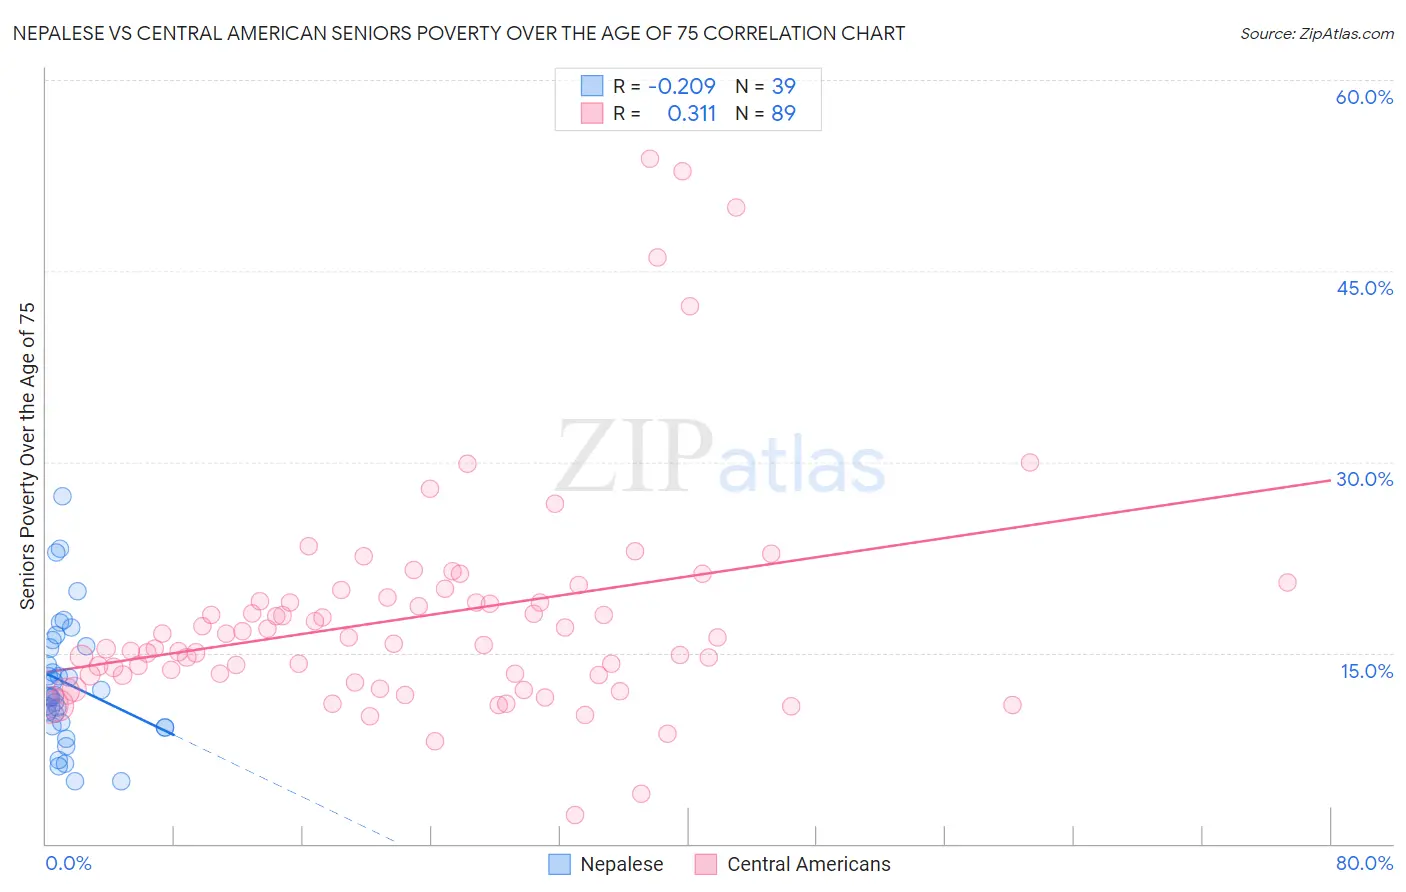 Nepalese vs Central American Seniors Poverty Over the Age of 75